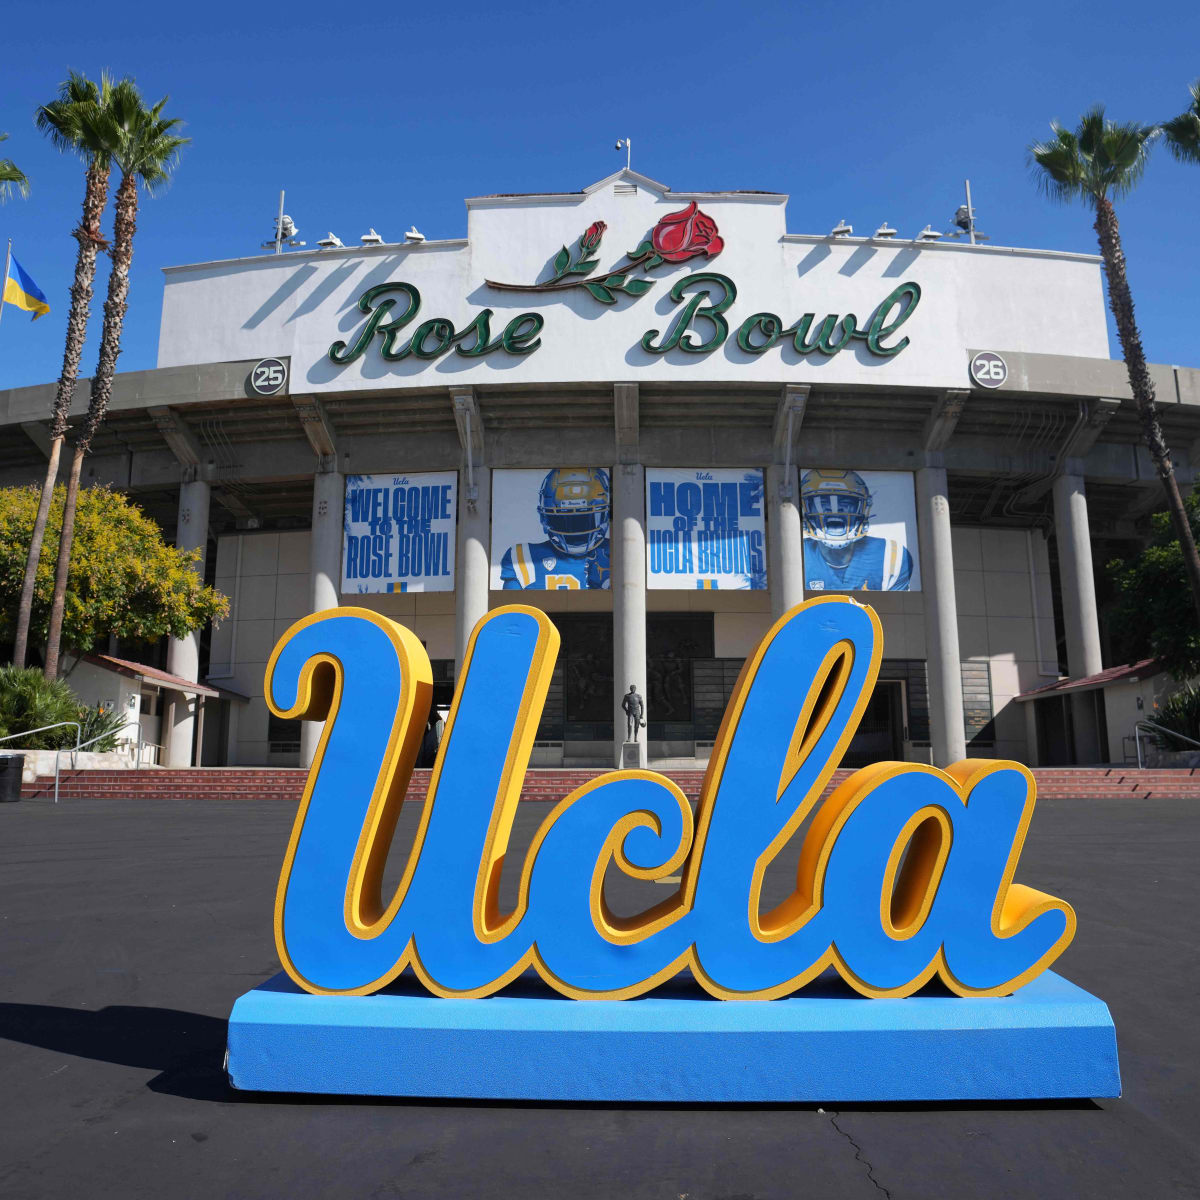 UCLA Student Section Relocated at Rose Bowl - UCLA